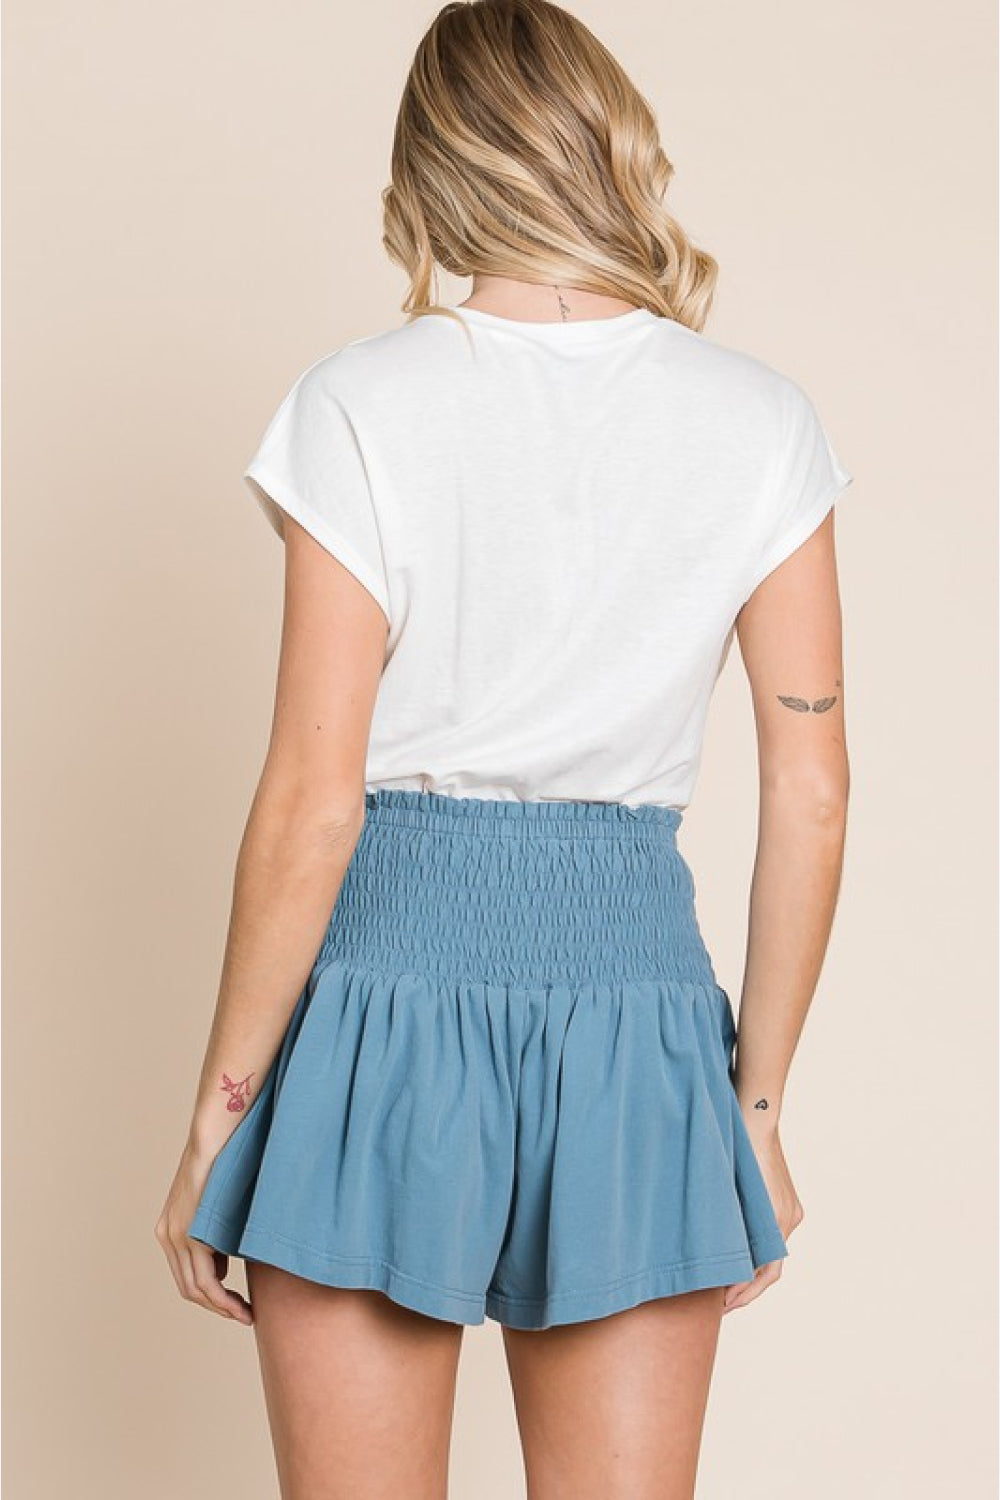 Life's A Highway: Mineral Washed Smocked Shorts | Shorts - CHANELIA